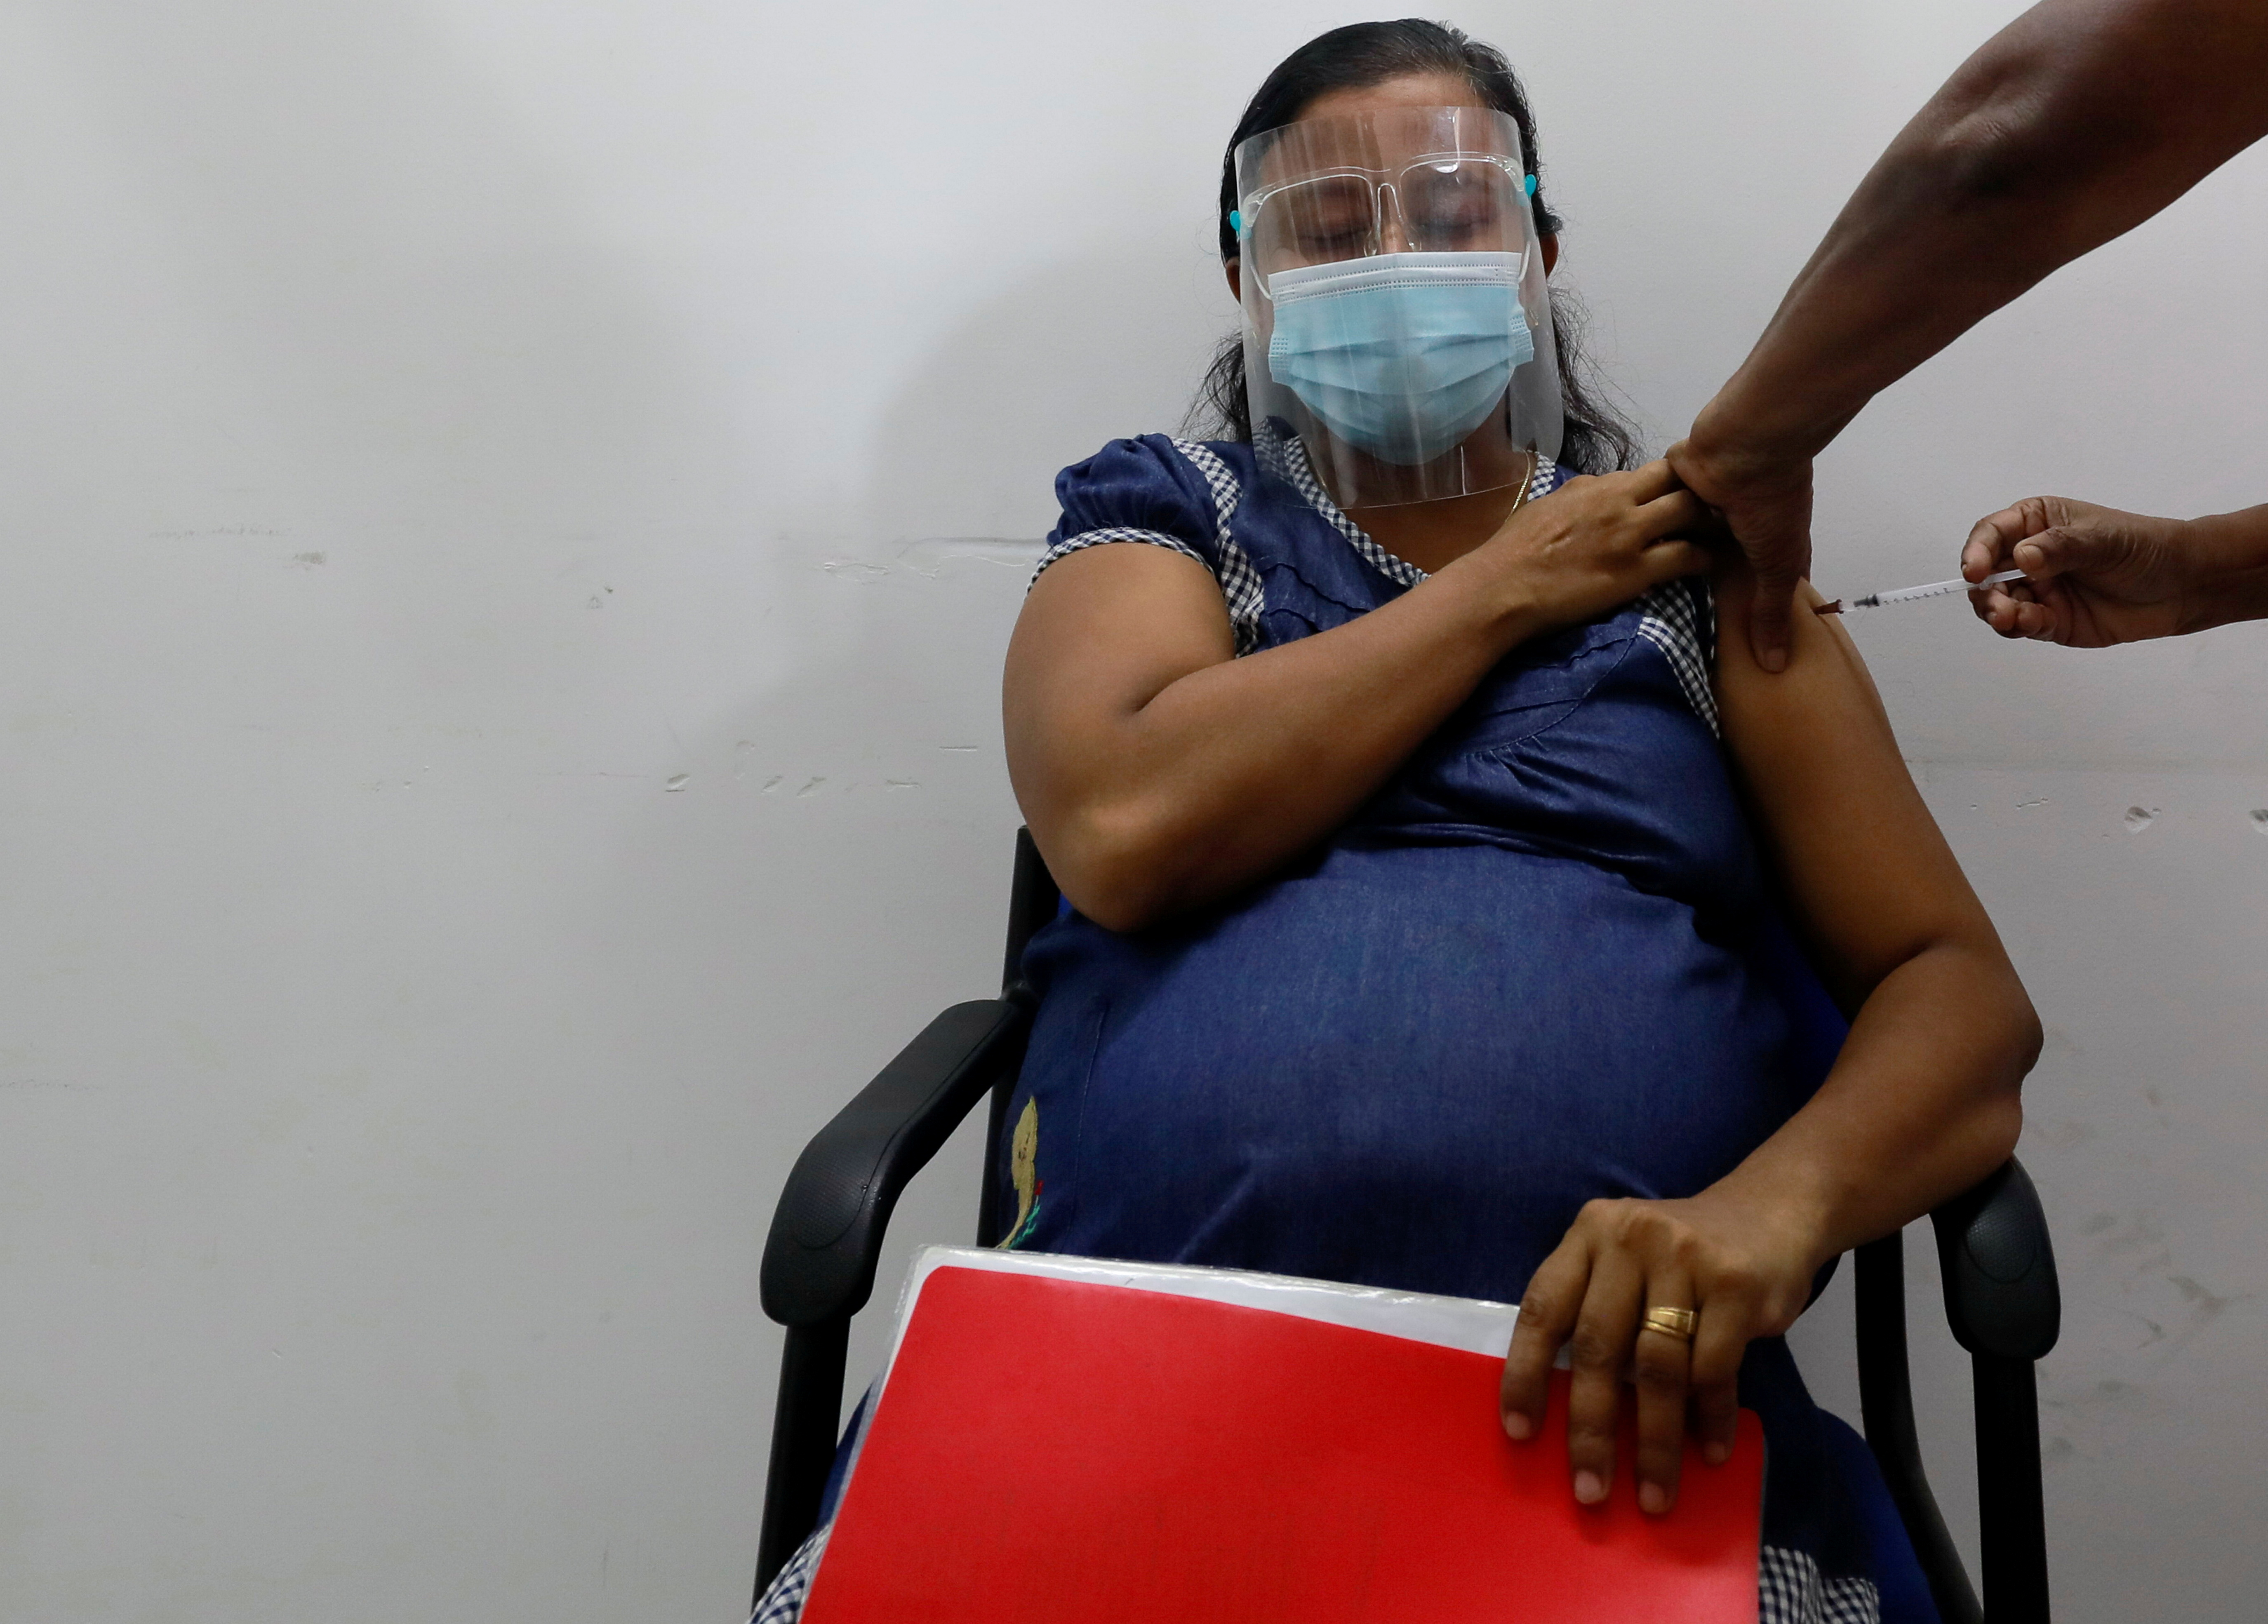 A pregnant woman receives a dose of Sinopharm vaccine against the coronavirus disease (COVID-19) during the launching ceremony of the vaccination for pregnant women in the country, in Piliyandala suburb, Colombo Sri Lanka June 9, 2021. REUTERS/Dinuka Liyanawatte/File Photo